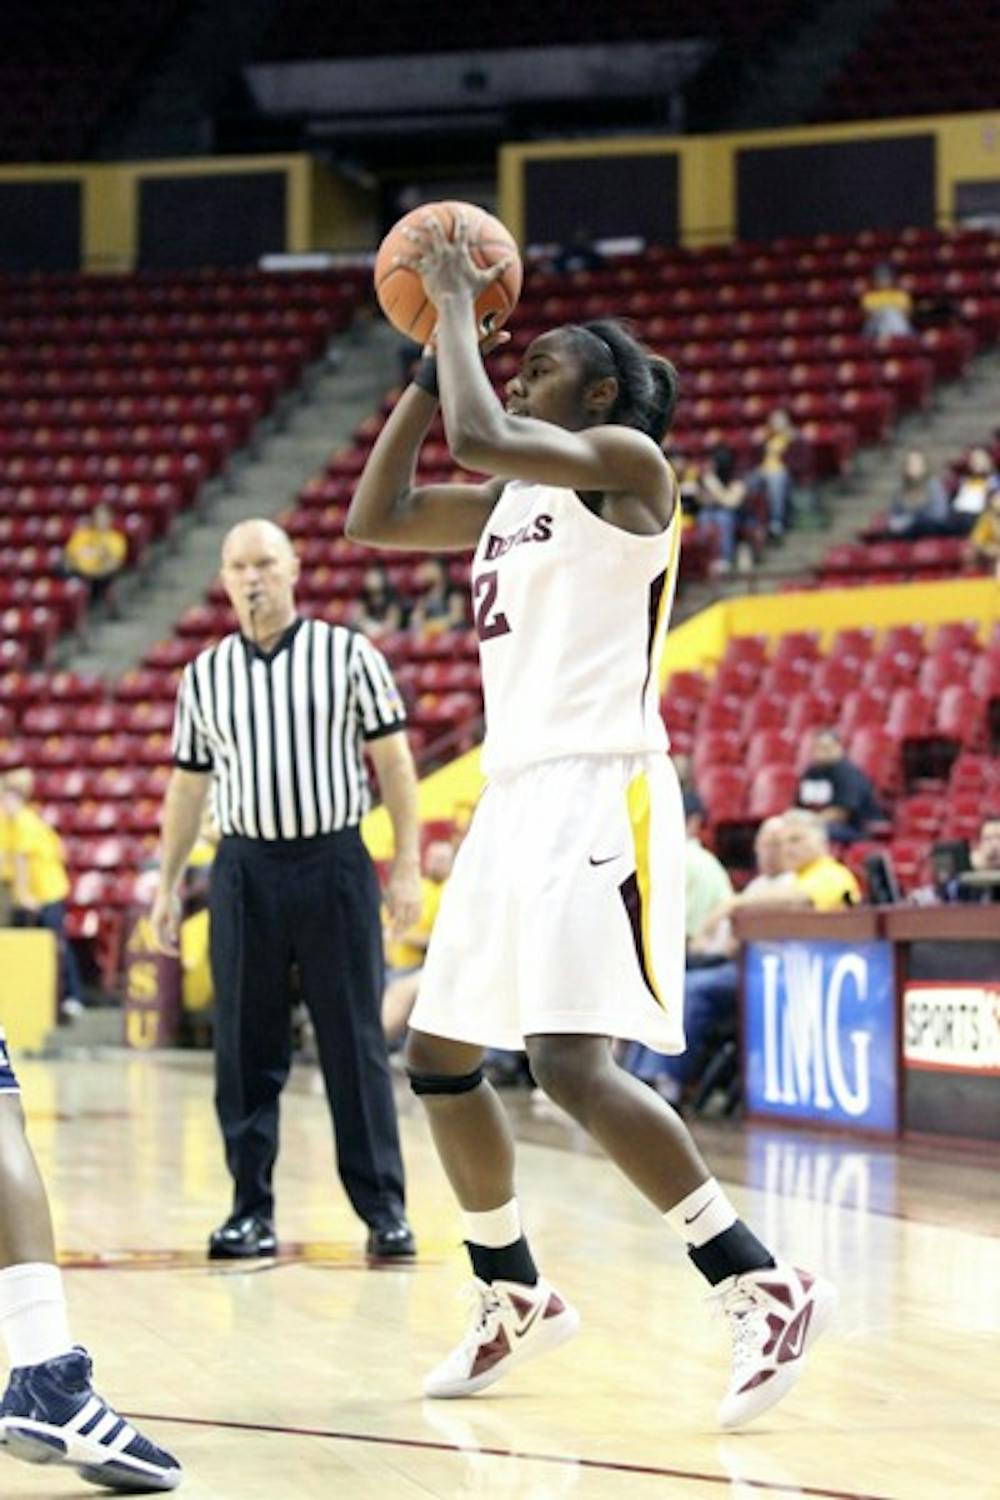 STRONG START: Junior guard Micaela Pickens looks to pass from behind the arc during the Sun Devils comfortable 66-46 victory over UC Riverside on Friday. With the overtime win over Colorado State on Sunday, ASU improved to 2-0. (Photo by Samuel Rosenbaum)